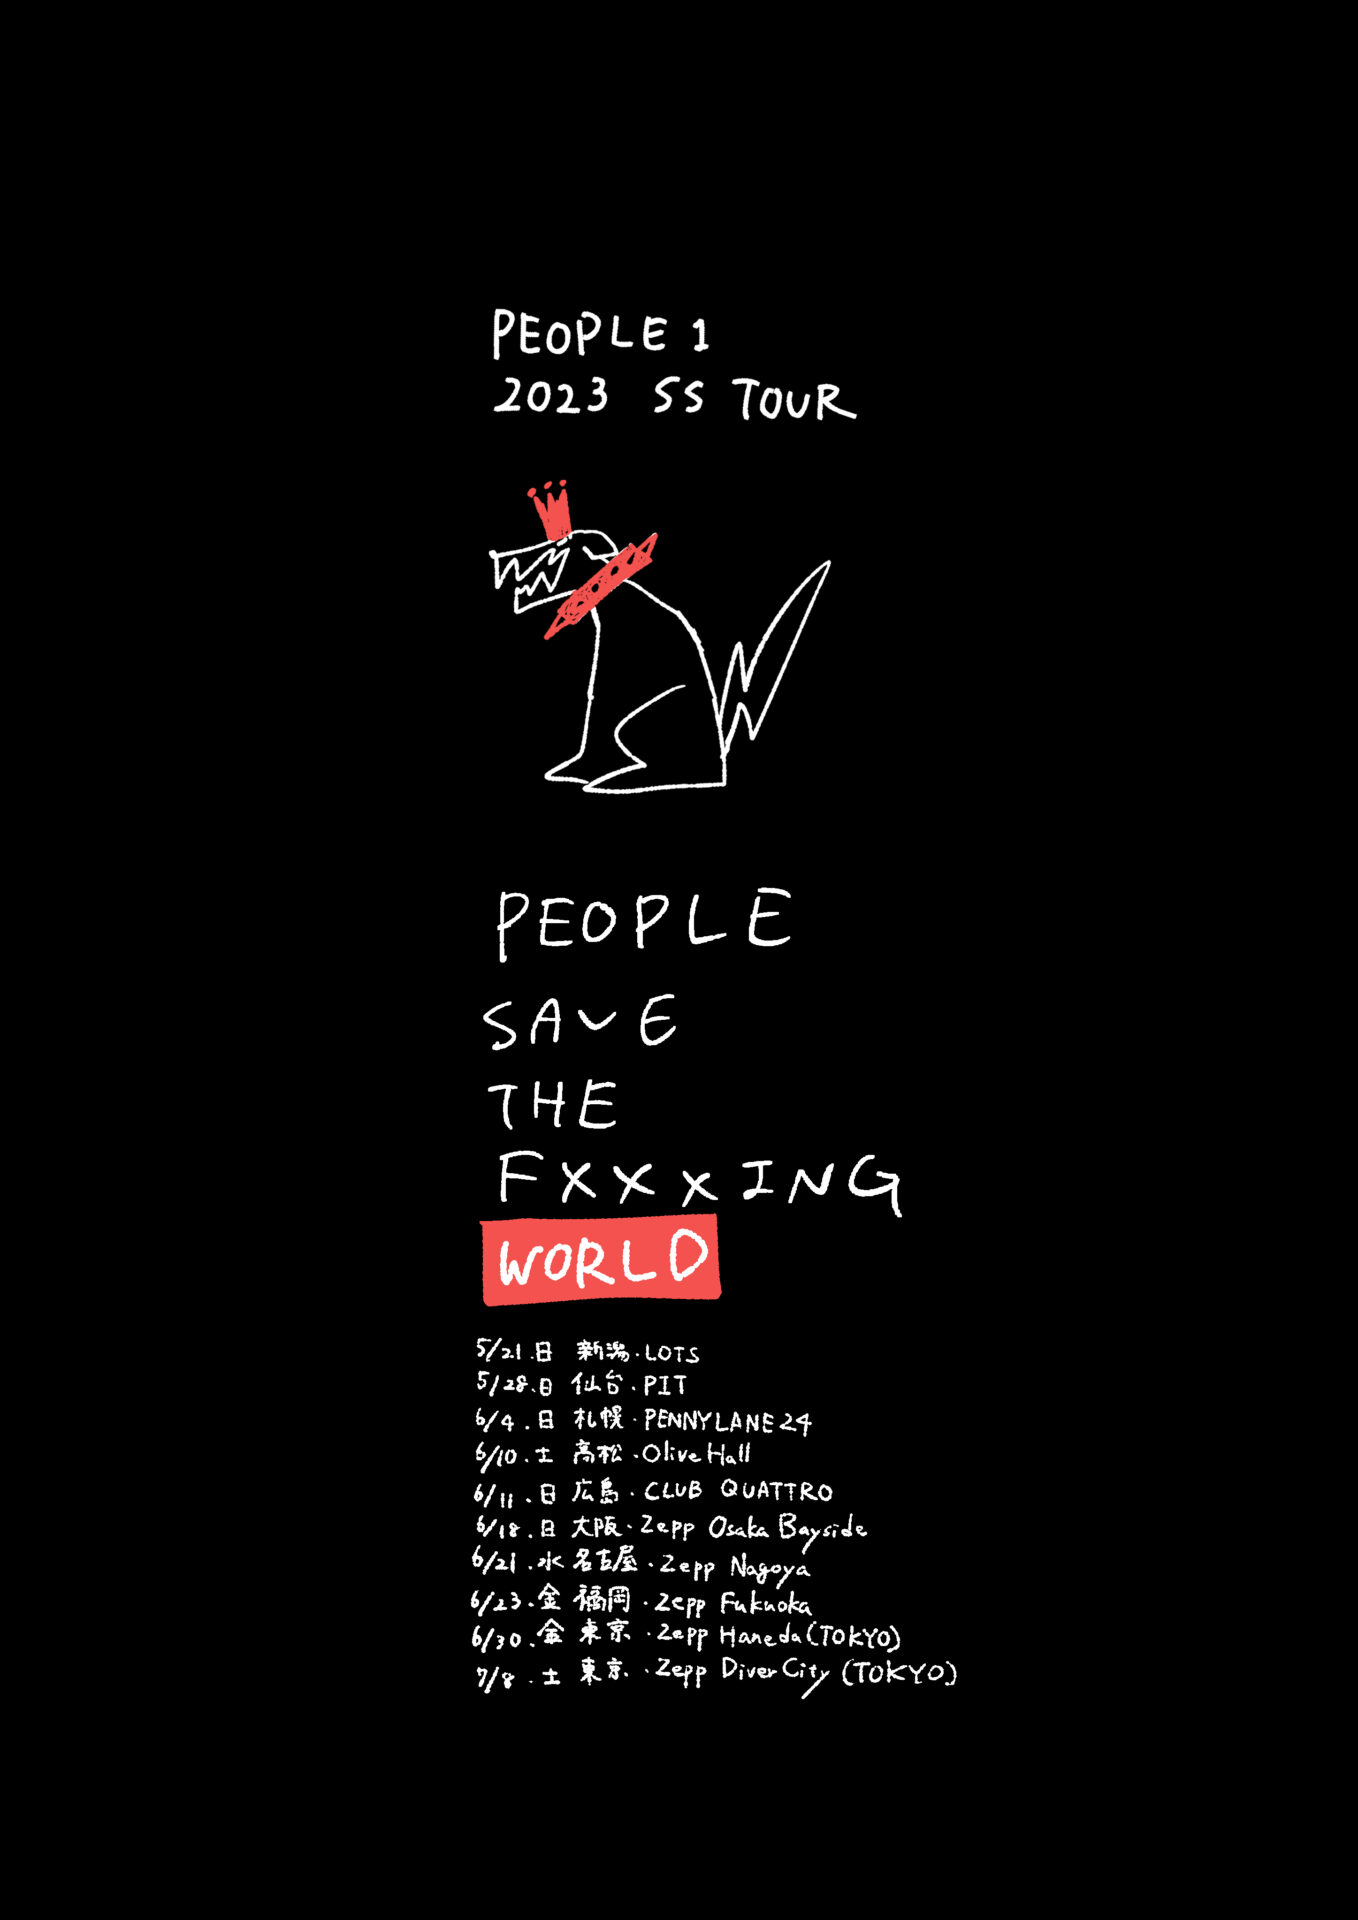 PEOPLE 1 2023 SS TOUR「PEOPLE SAVE THE F×××ING WORLD」